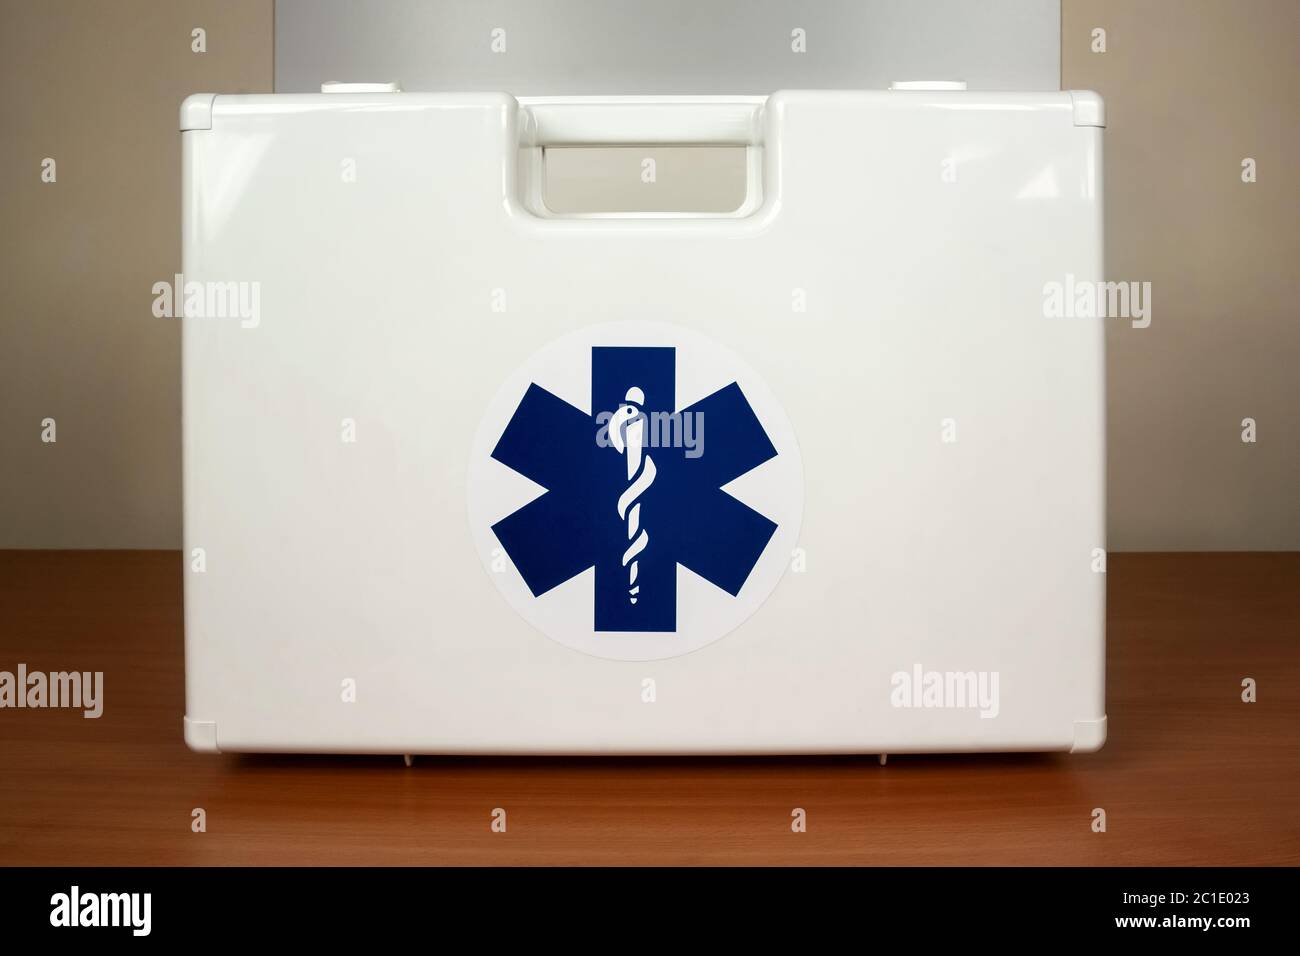 First aid kit, containing all the medical aids for a rapid emergency intervention. Portable transportable kit. Stock Photo